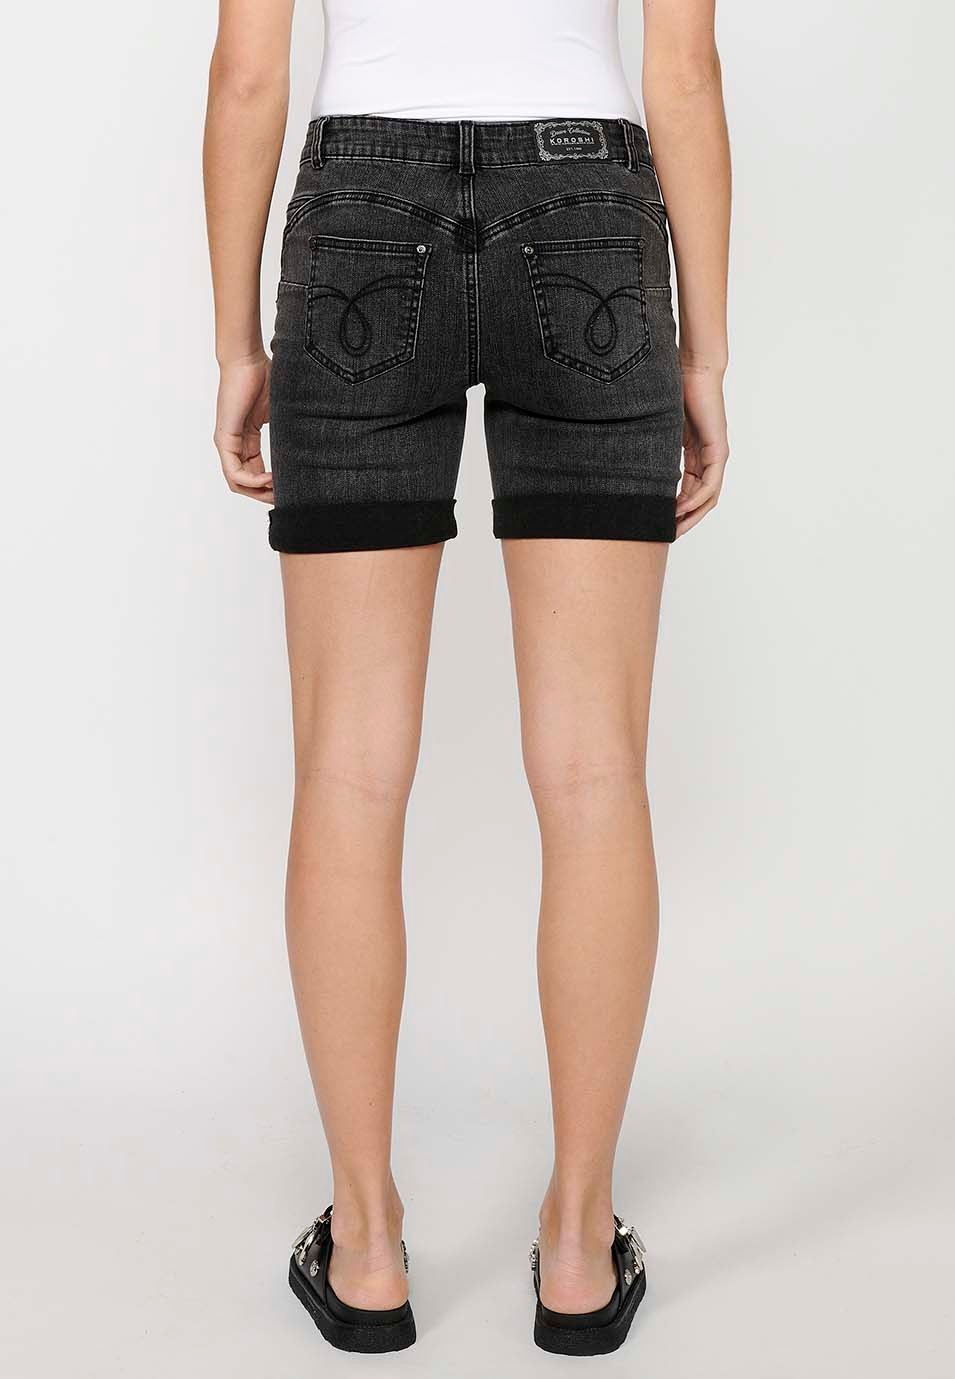 Shorts with a turn-up finish with front closure with zipper and button and floral embroidery in Black for Women 9